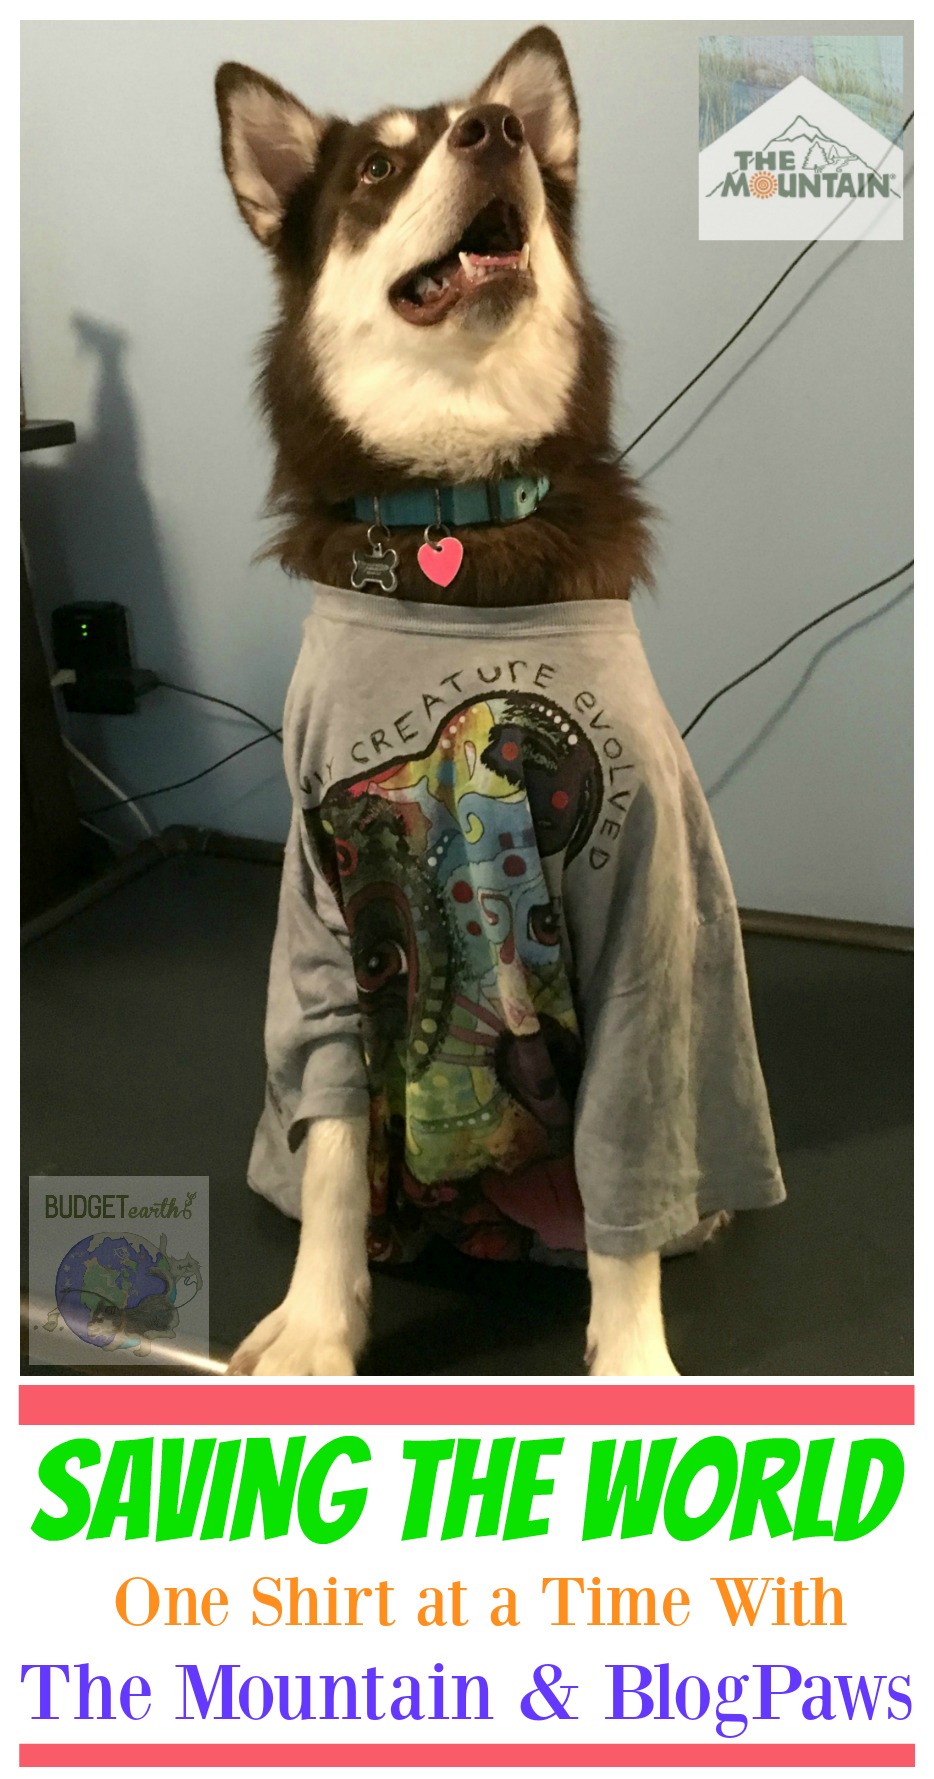 Saving the World One Shirt at a Time with The Mountain & BlogPaws